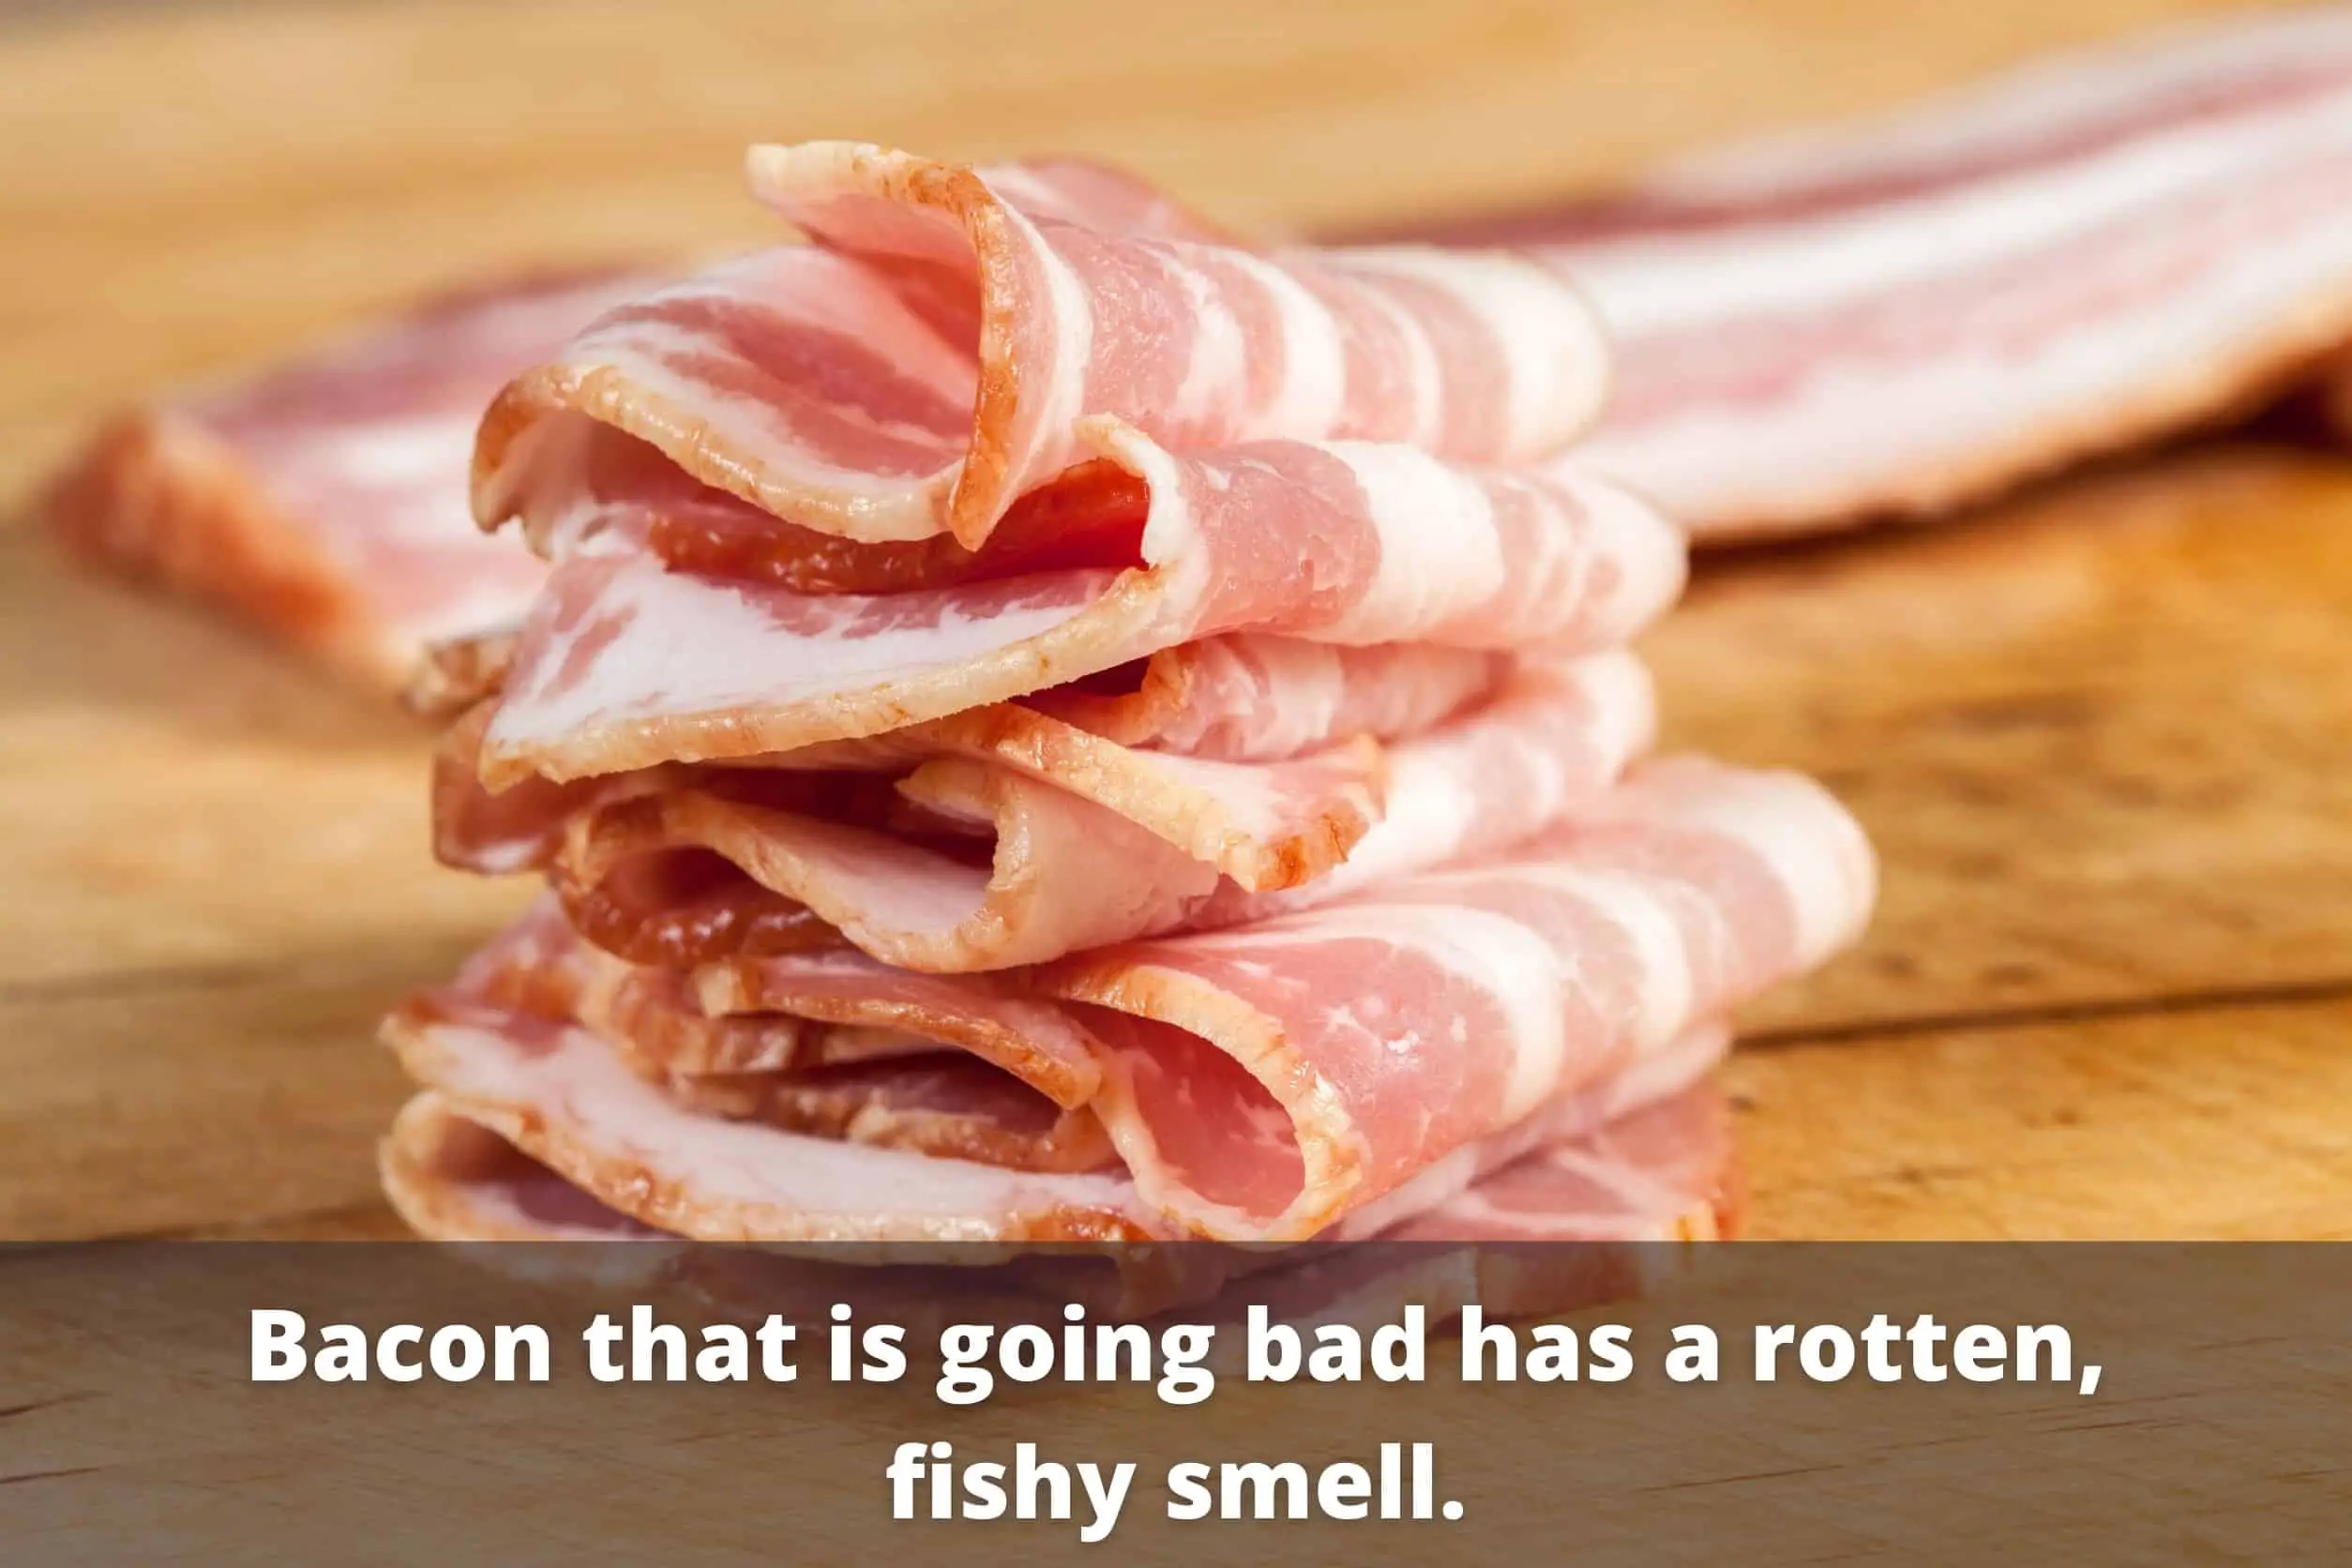 bacon that is bad will smell fishy